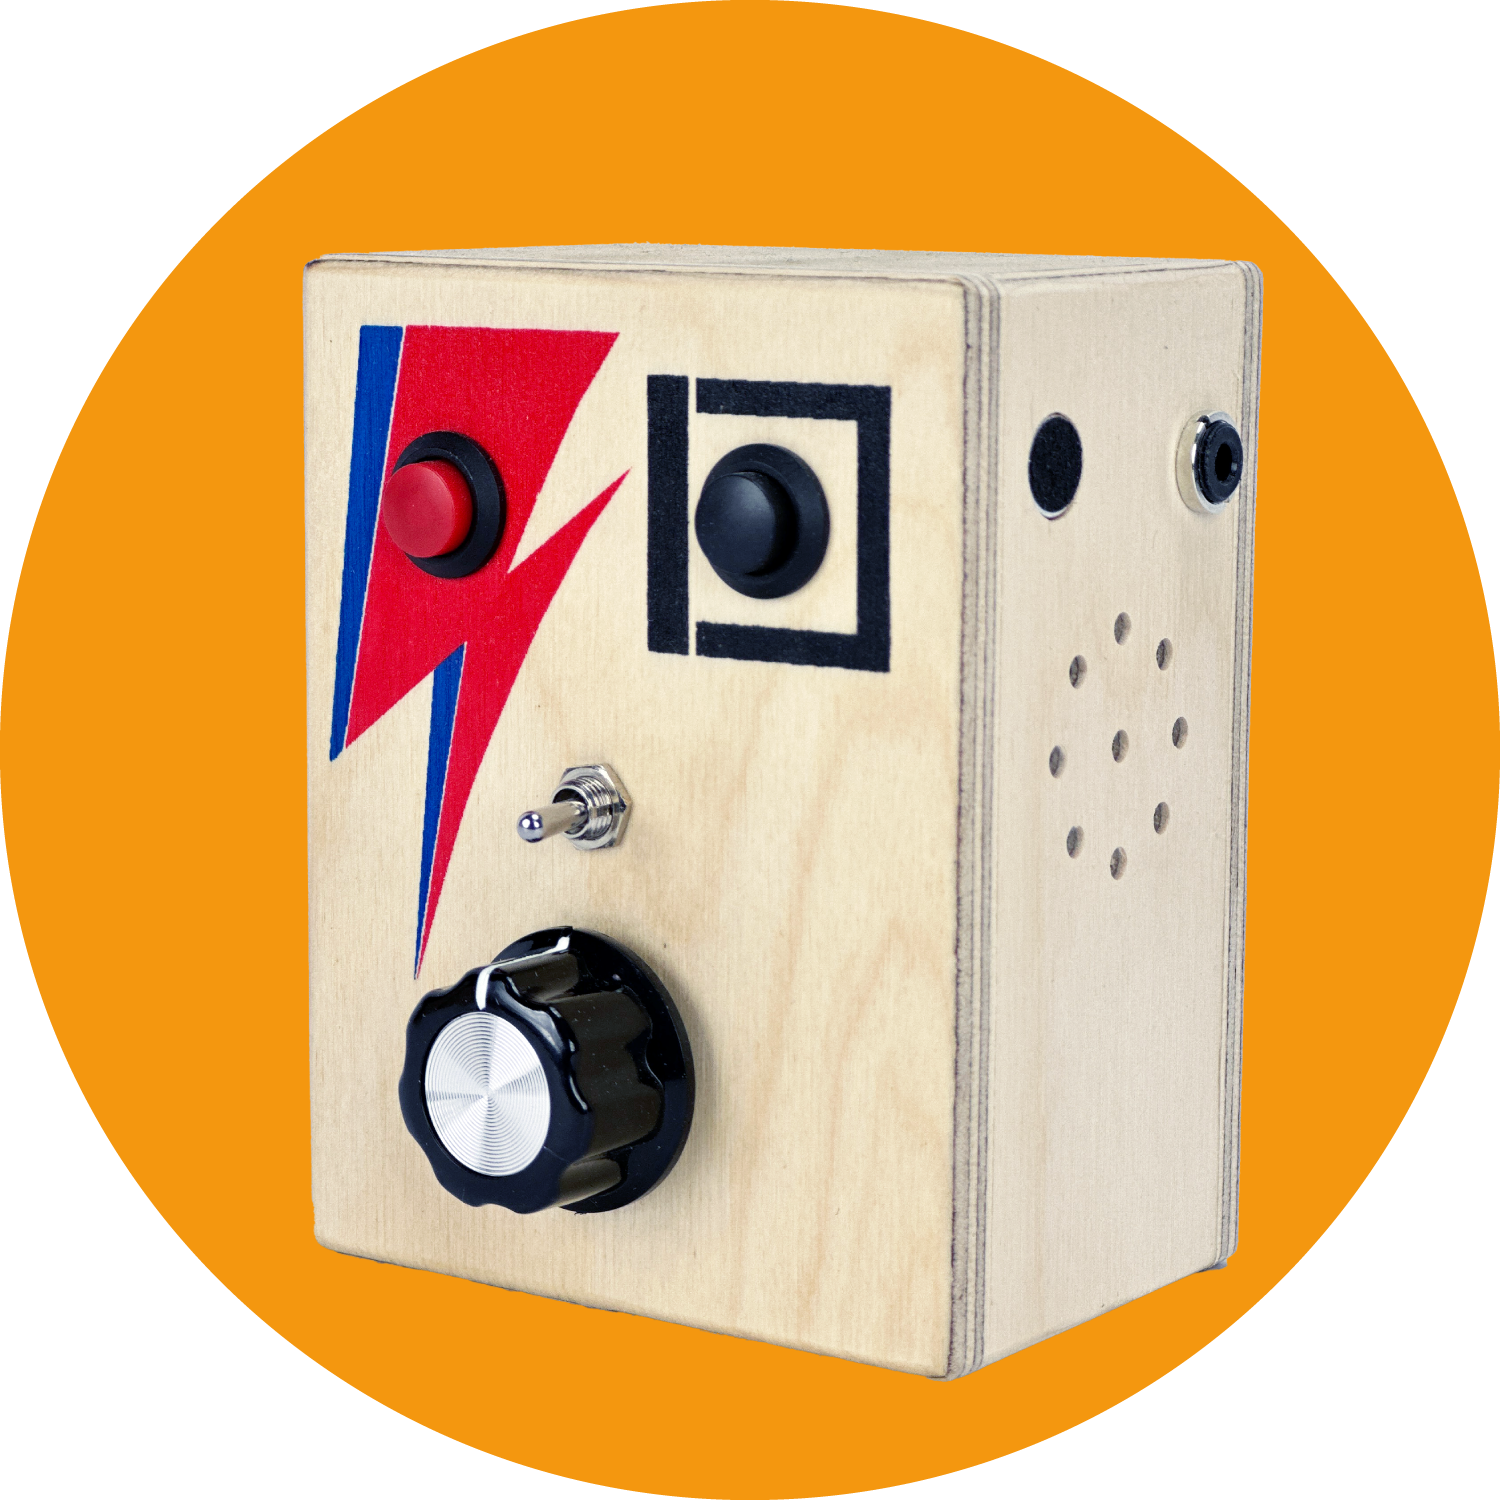 Space Oddity | David Bowie Tribute | Voice Recorder Sound Toy With Loop Switch